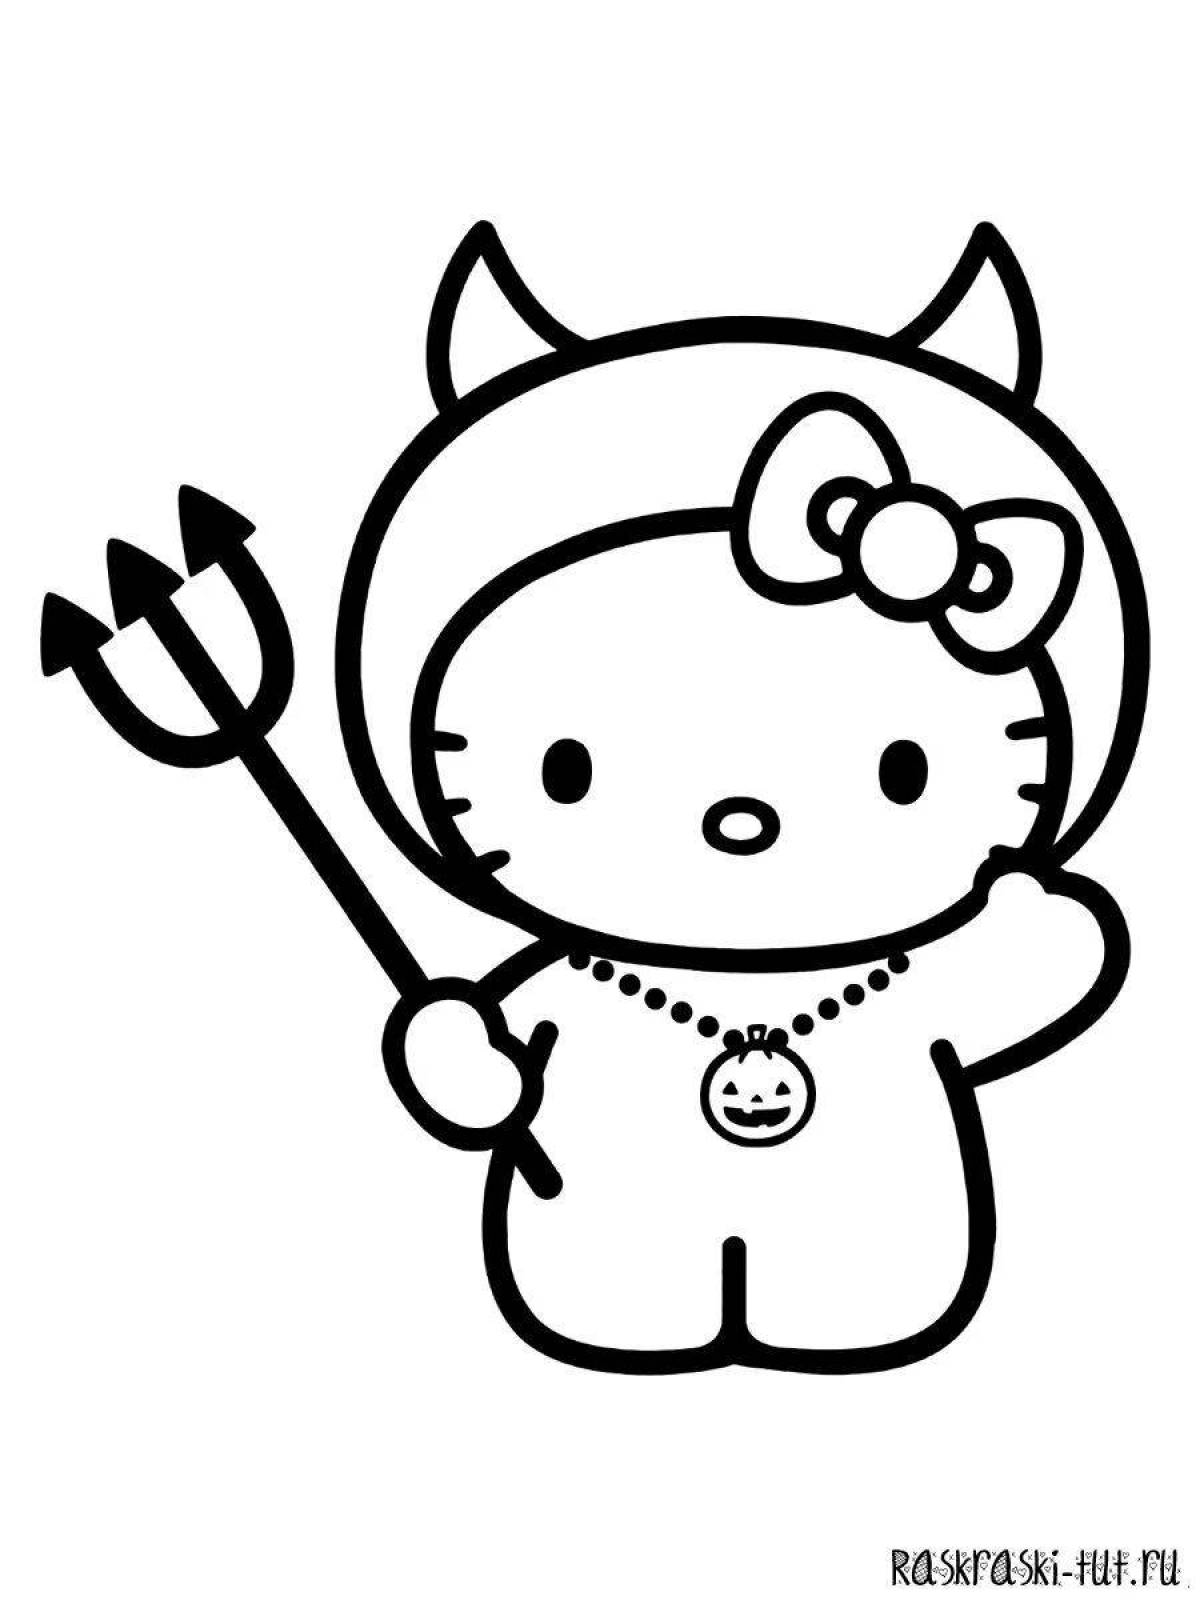 Cute little hello kitty kuromi coloring page